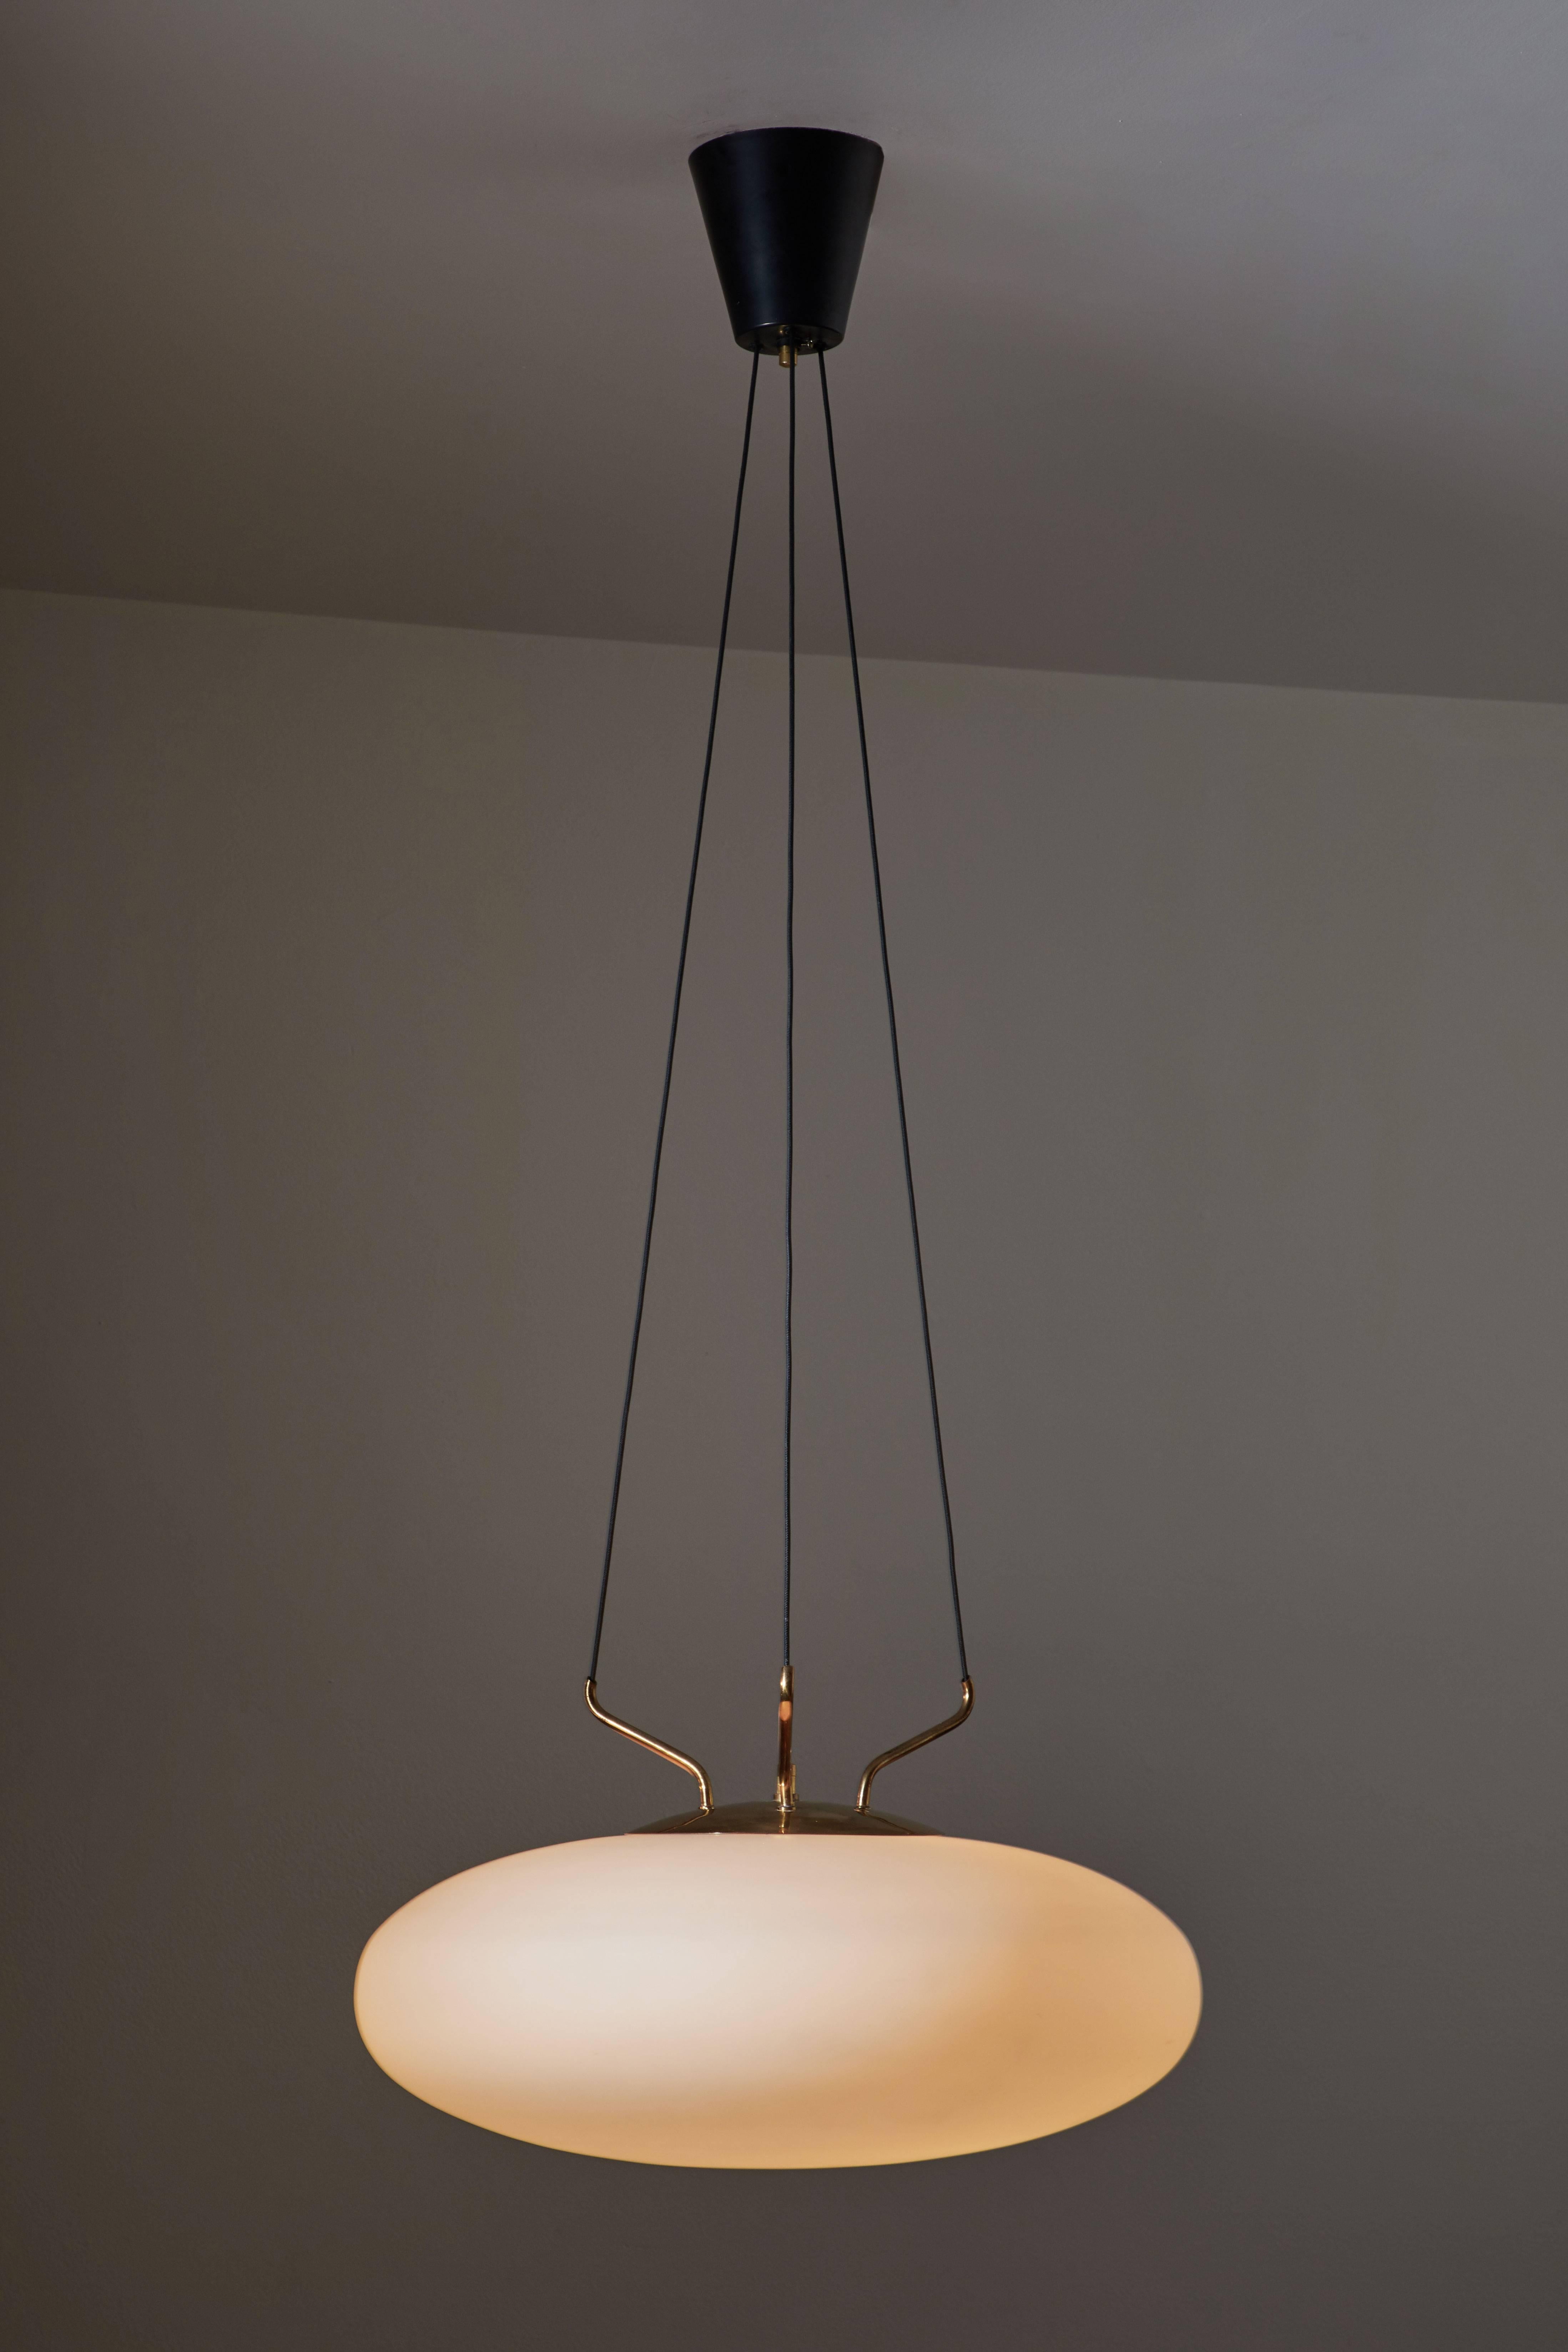 Elliptical shaped pendant manufactured by Stilnovo In Italy, circa 1950s. Brushed satin glass with elegant brass armature that house three suspension wires. Overall drop can be customized. Original canopy. Rewired for US junction boxes. Takes one